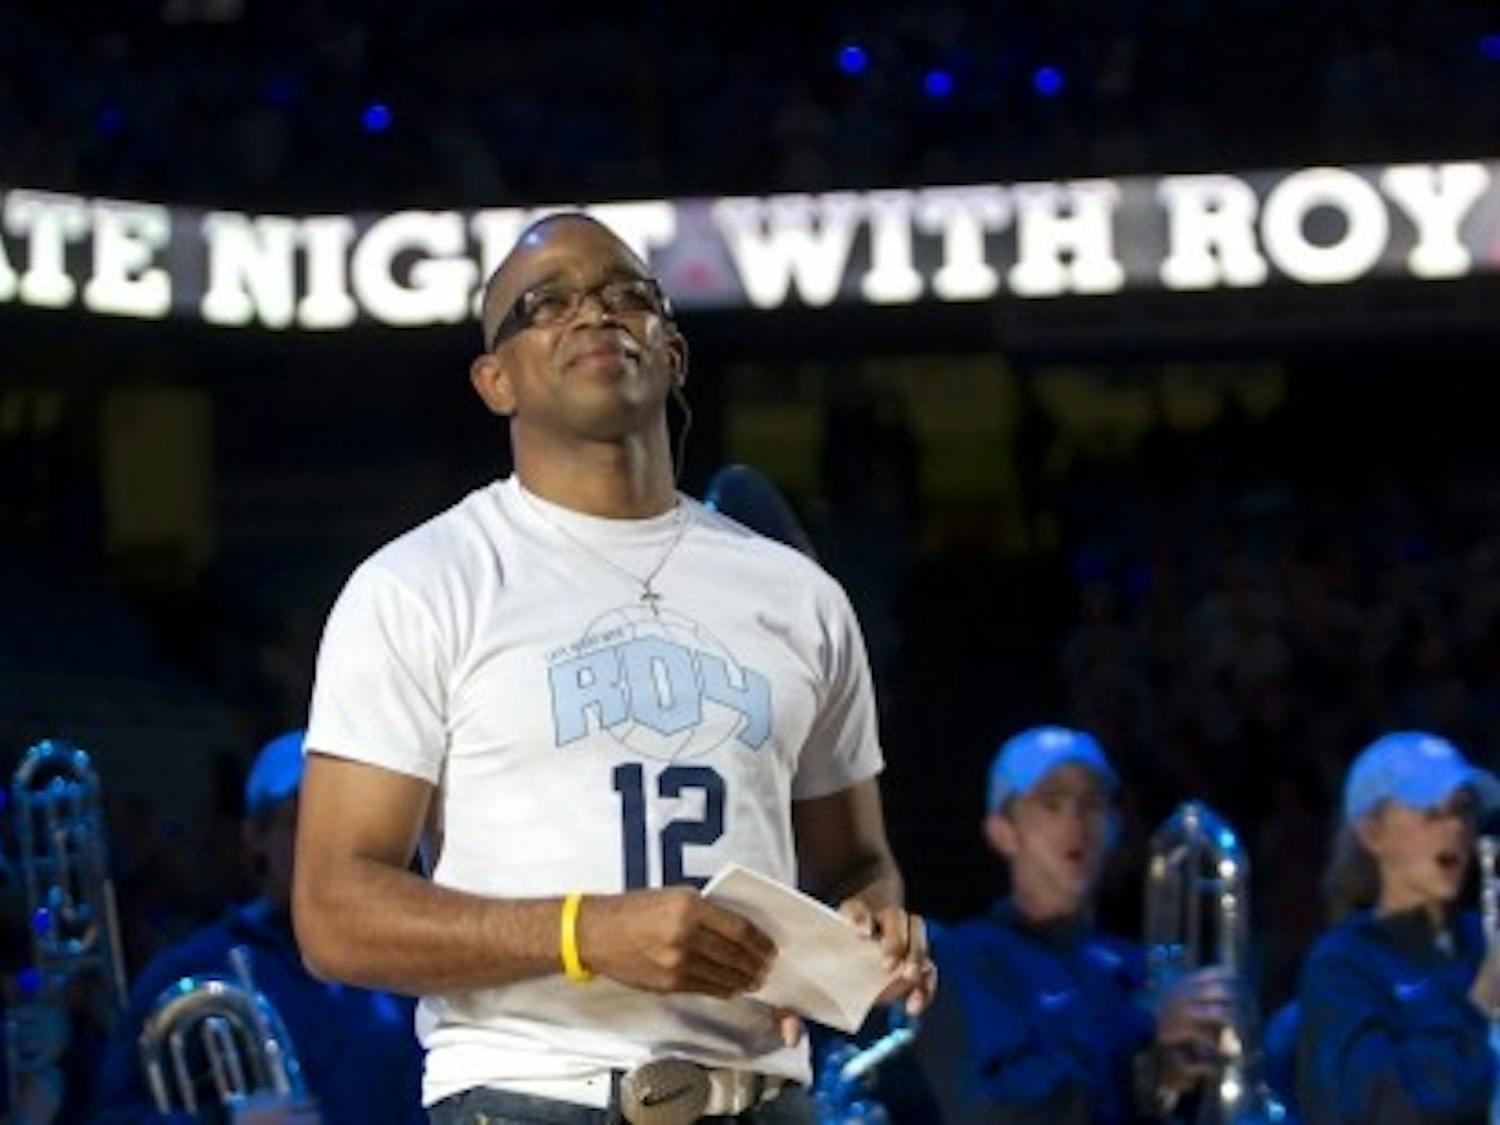 Longtime ESPN anchor Stuart Scott returned to Chapel Hill to host Late Night with Roy at his alma mater in 2012.